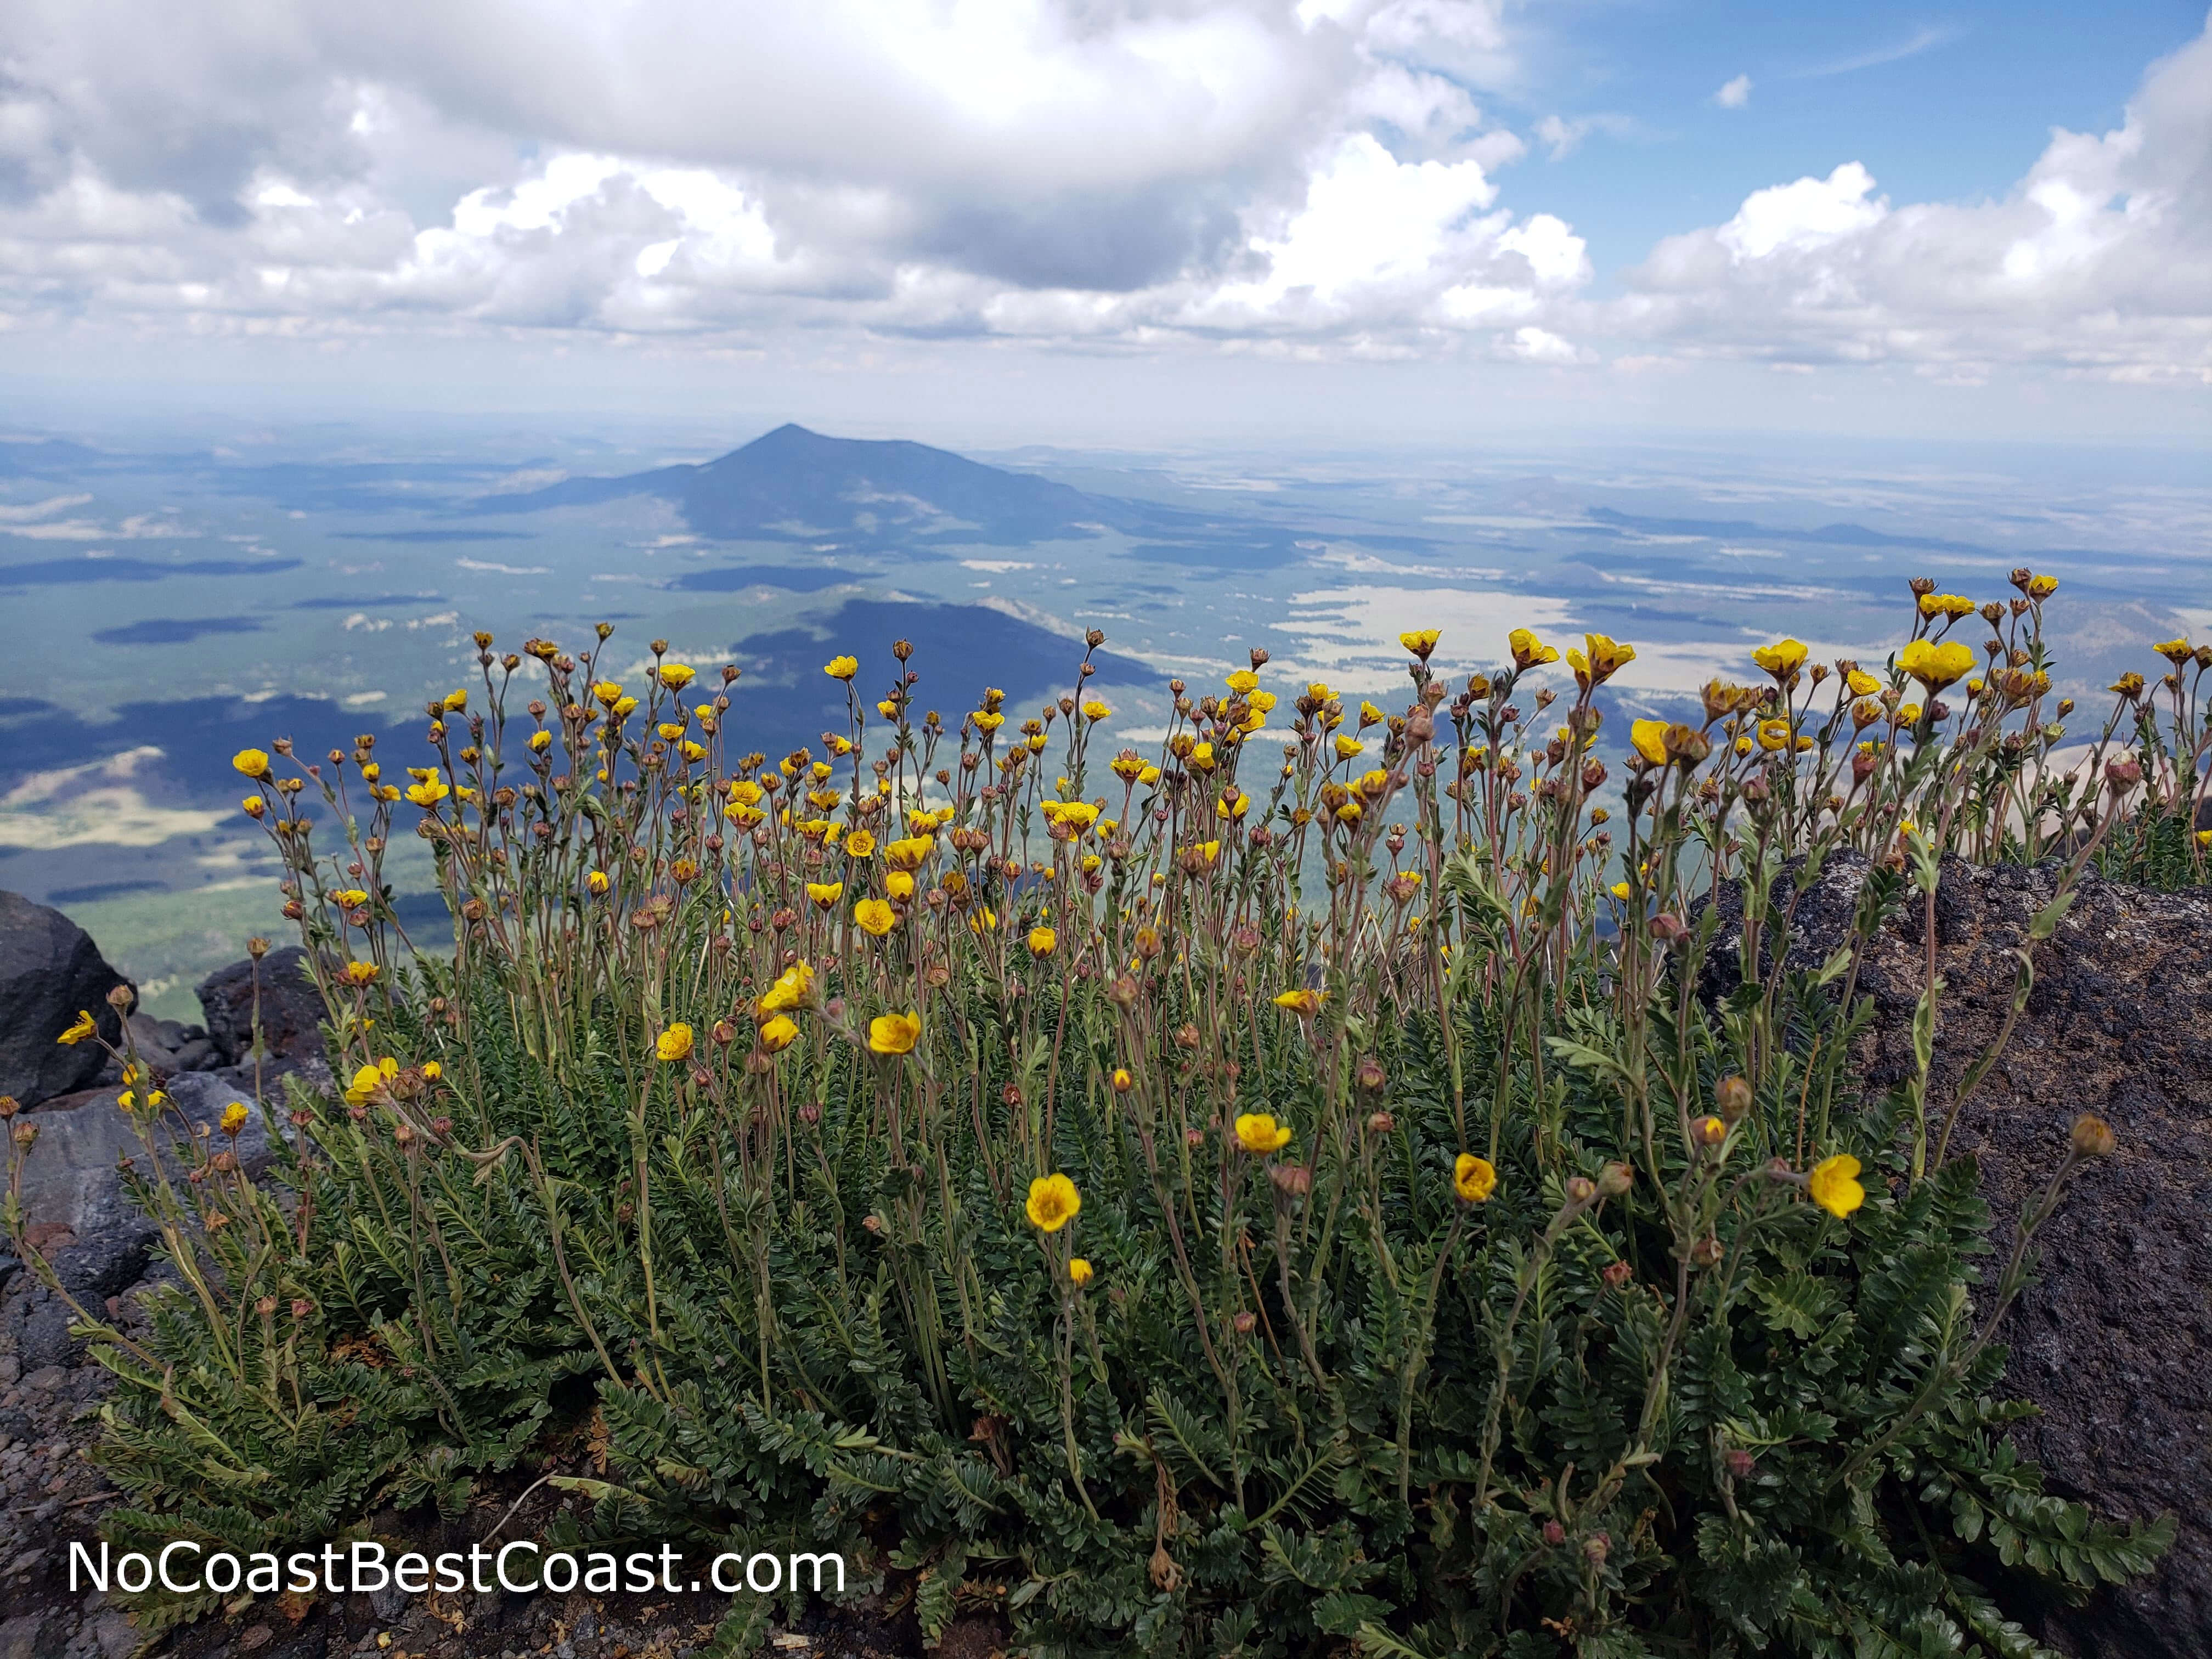 The pretty yellow flowers of the San Francisco groundsel only grow on these mountains